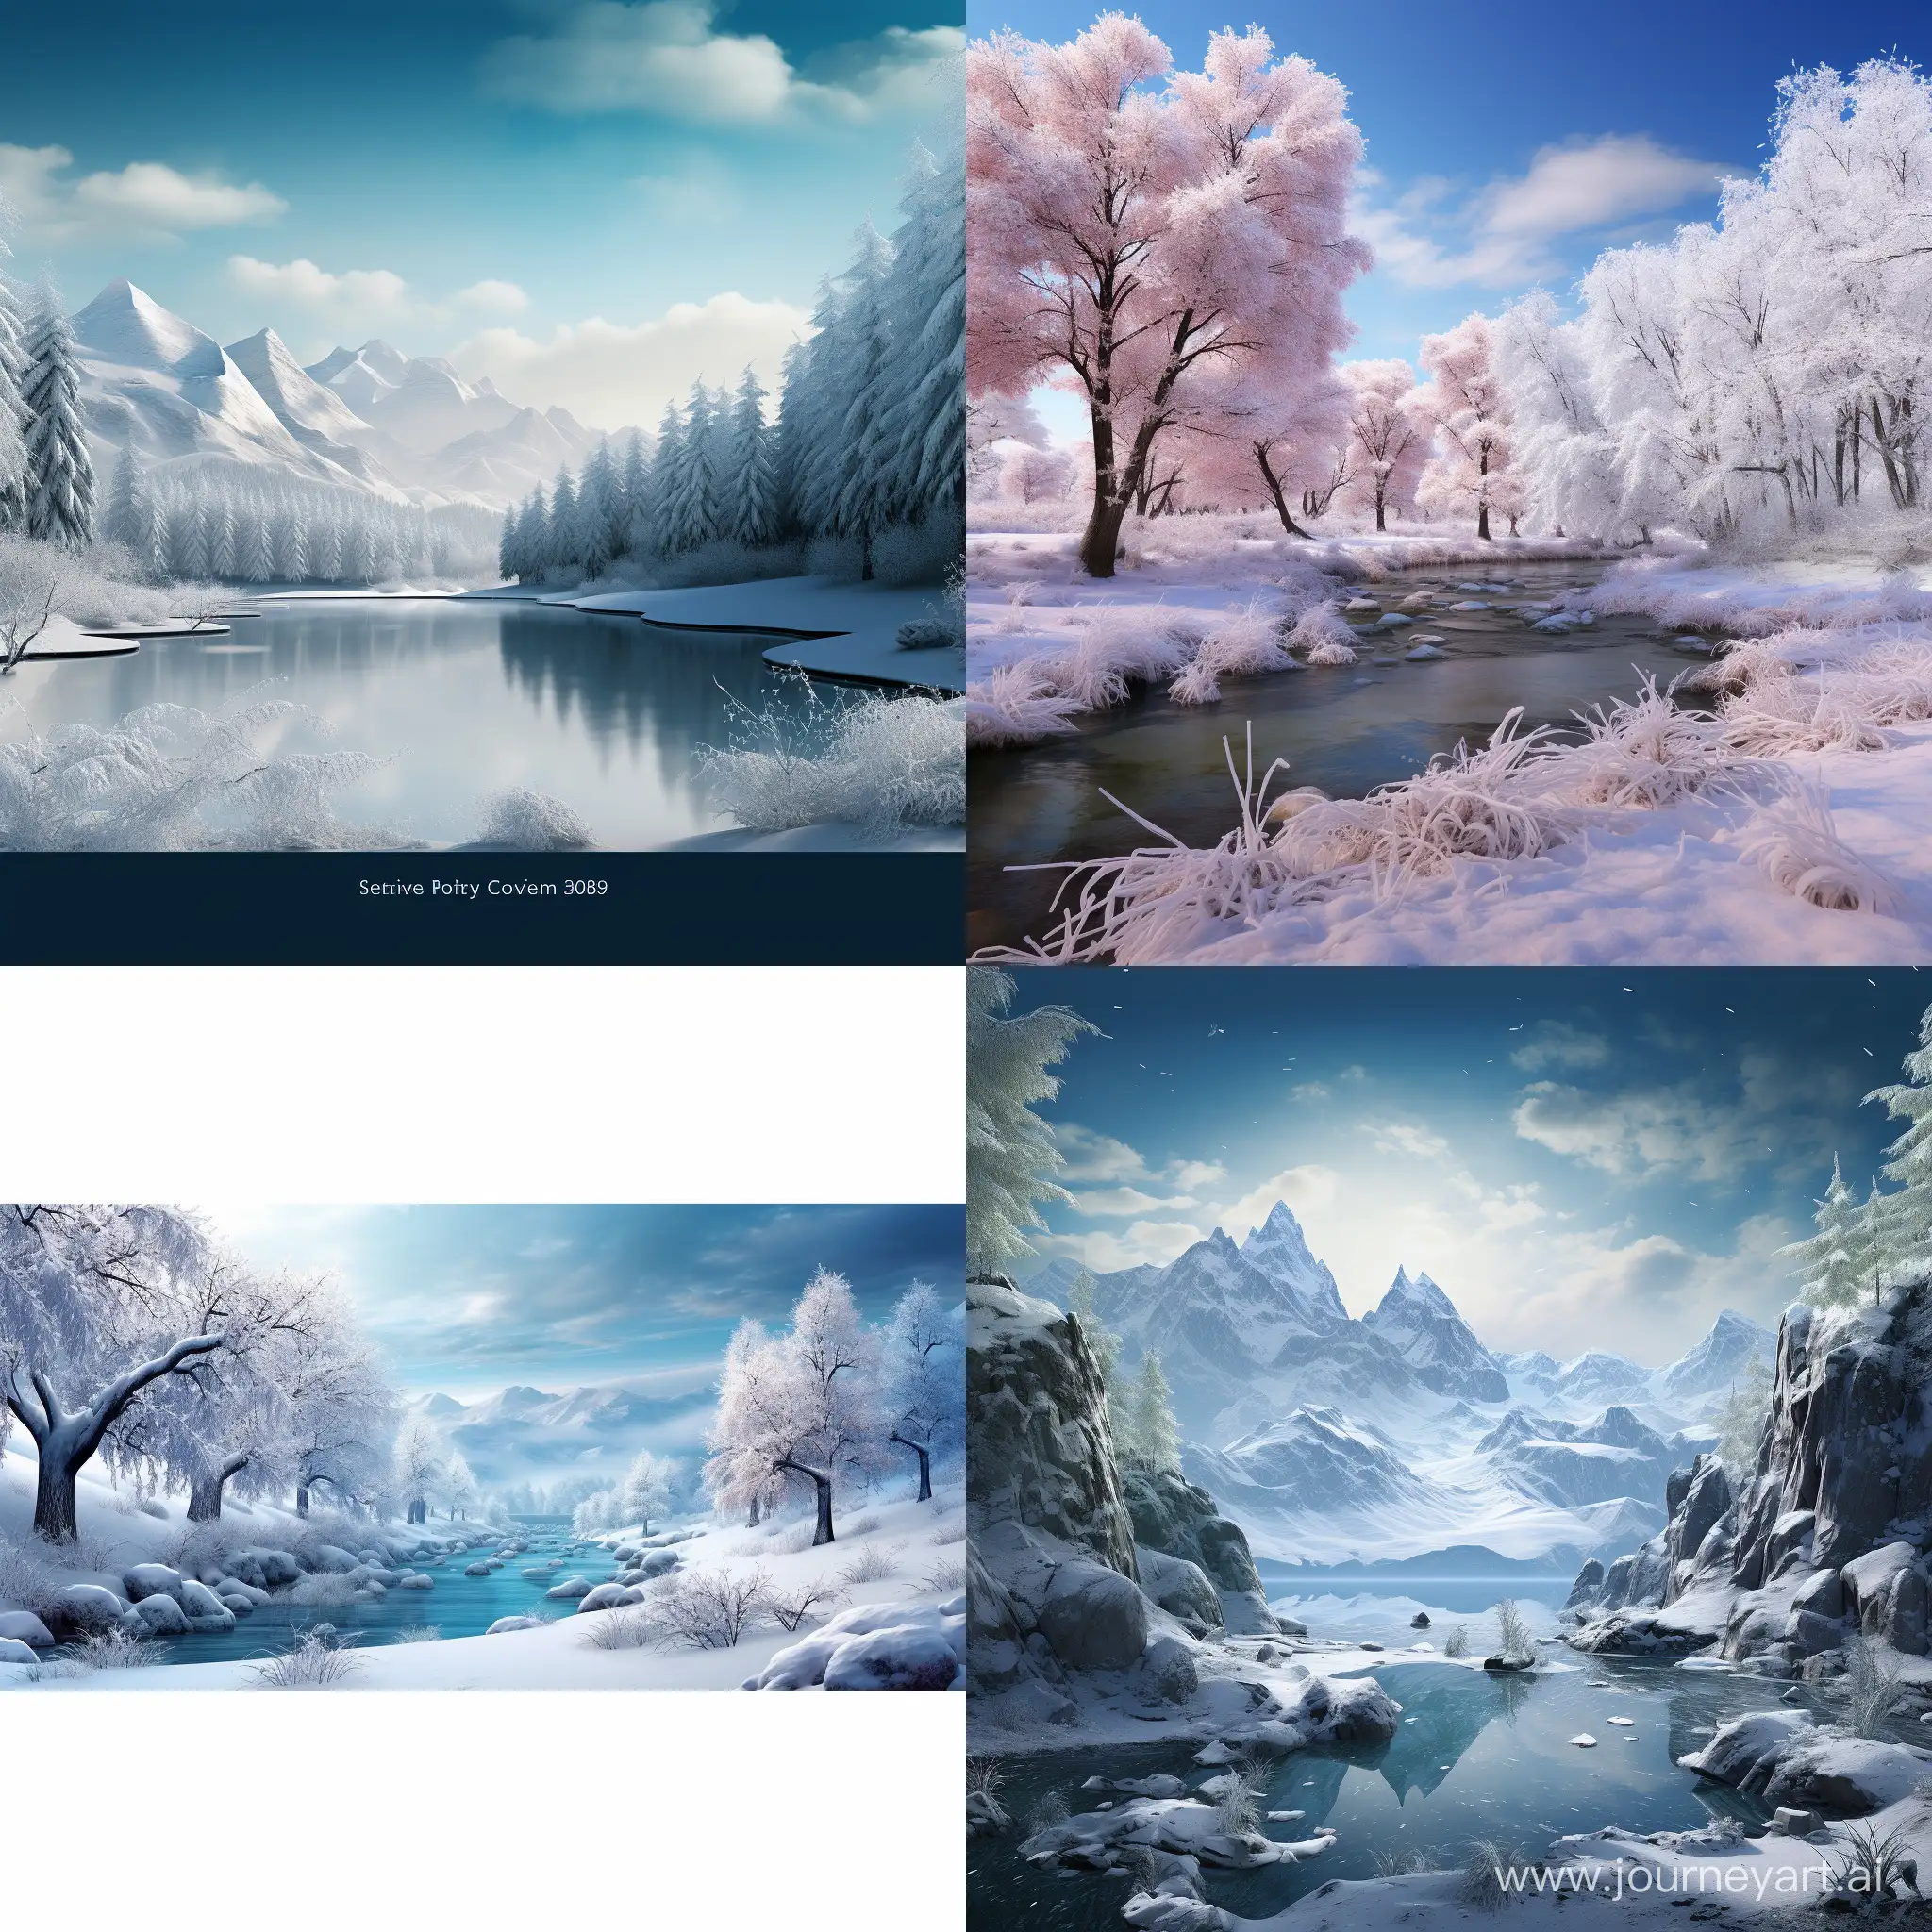 Explore-a-Snowless-Wonderland-in-a-Whimsical-Fantasy-Landscape